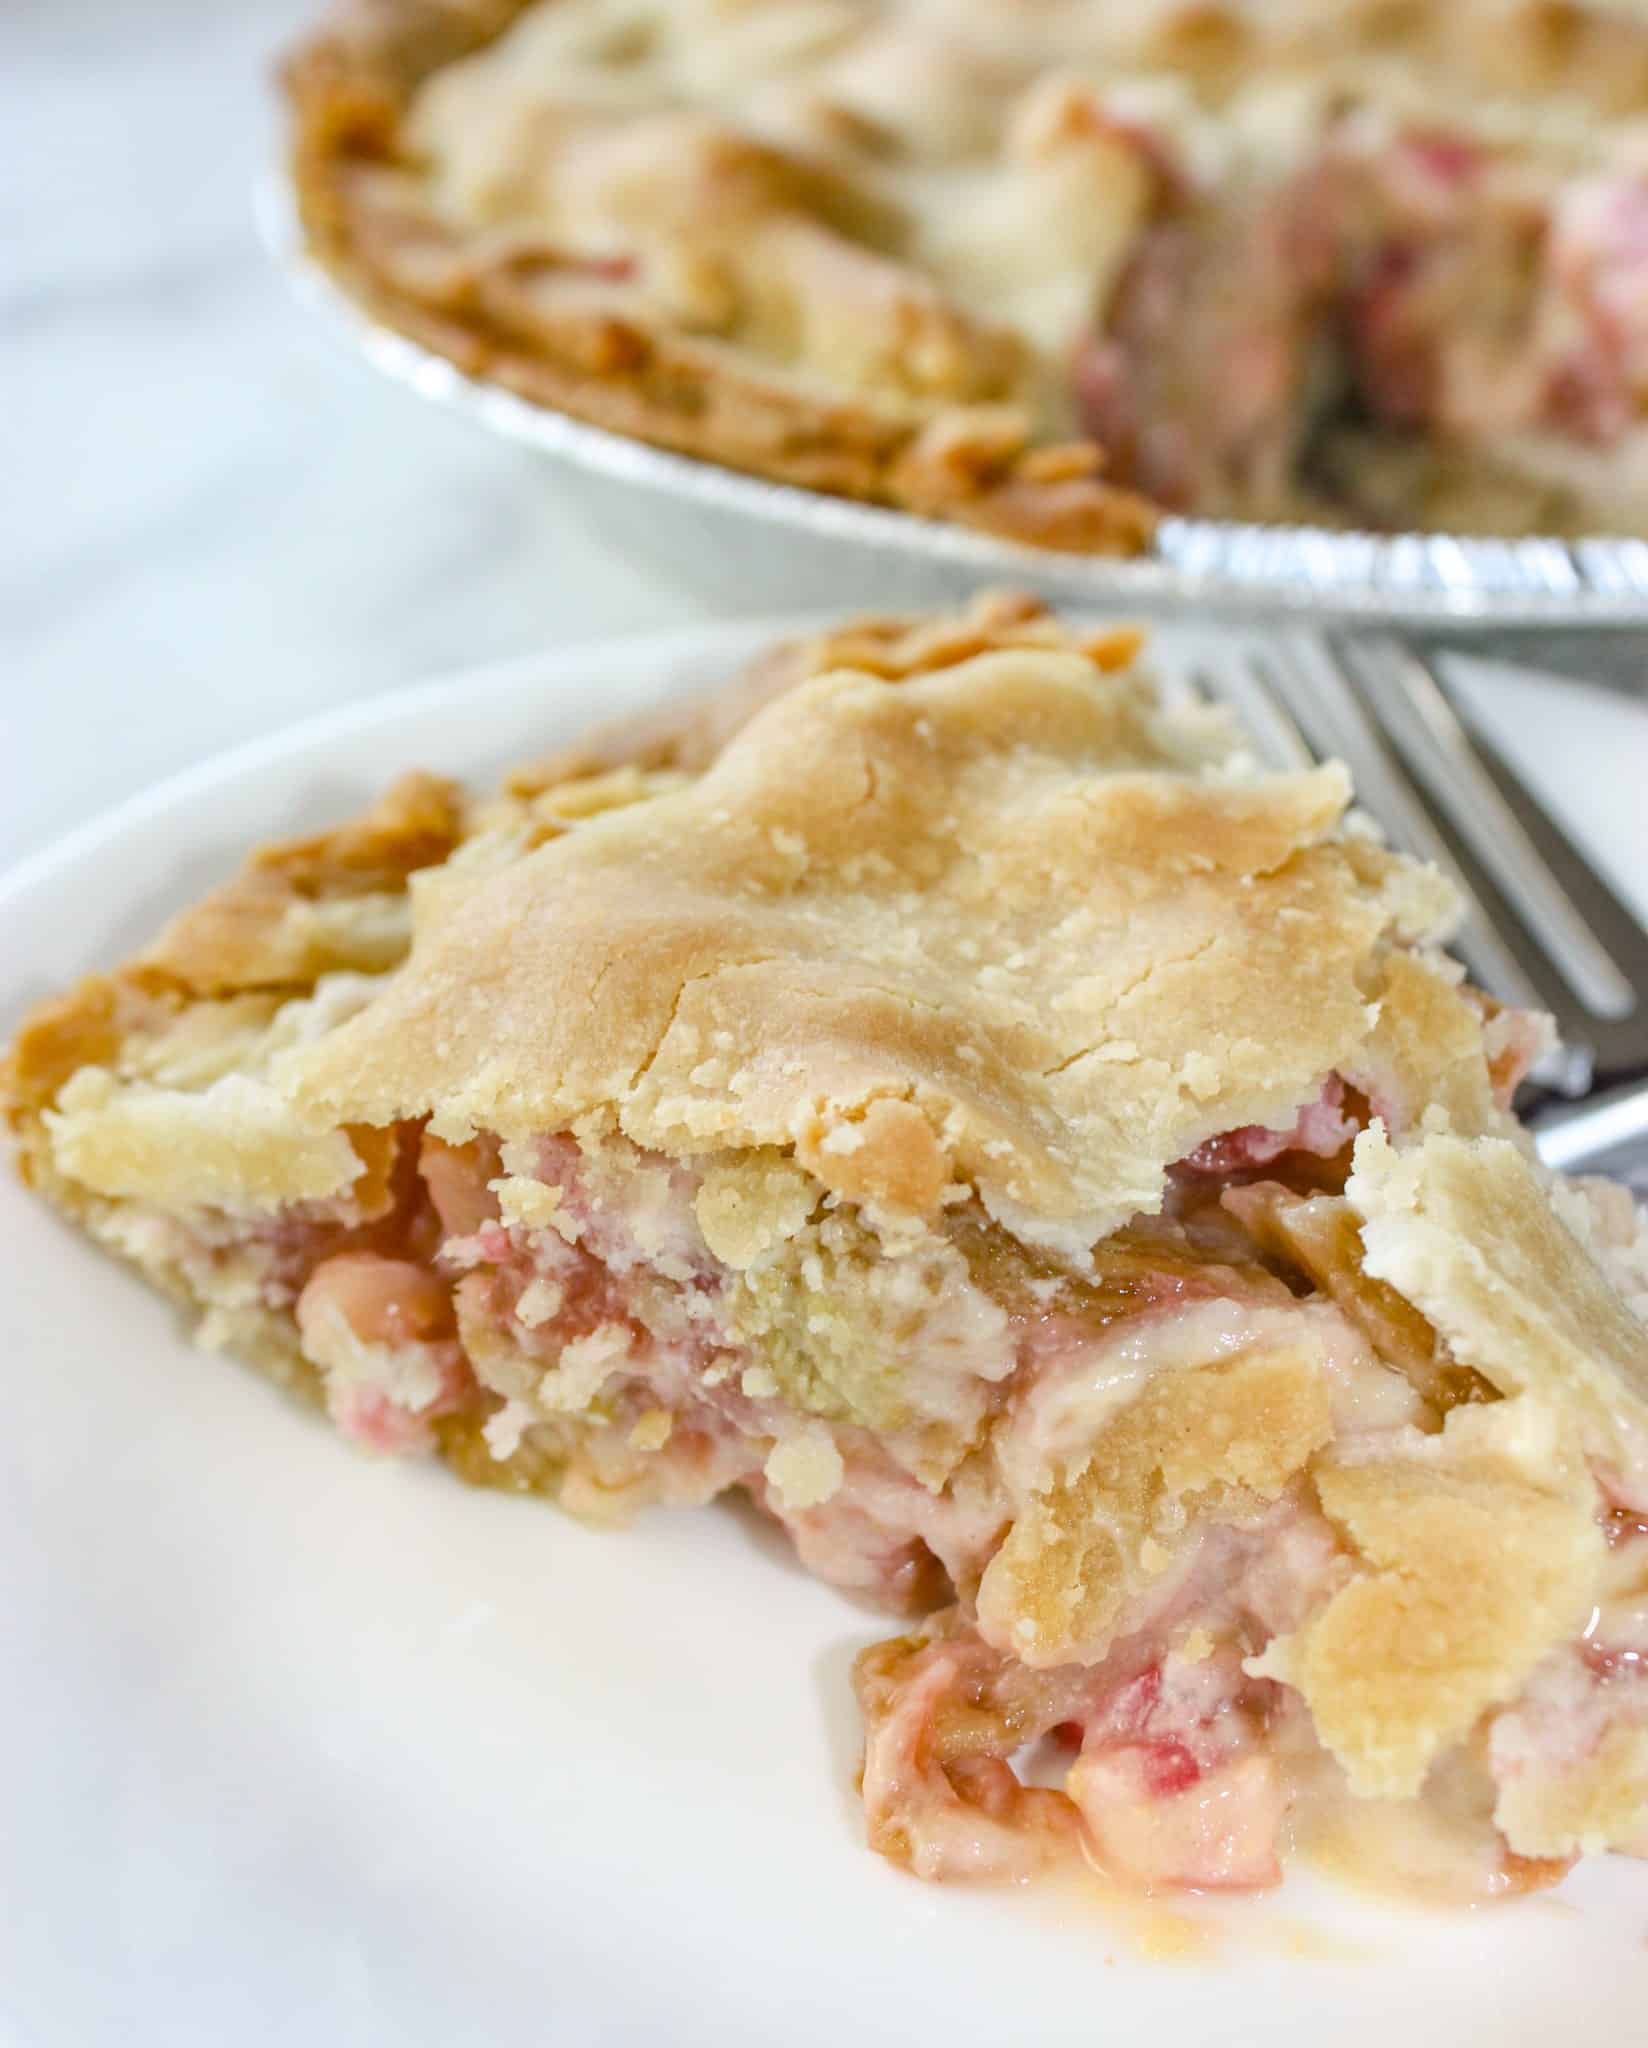 Gluten Free Rhubarb Pie is a blend of sweet and slightly tart flavouring.  I look forward to this tasty dessert every year when this spring vegetable is harvested from the garden.